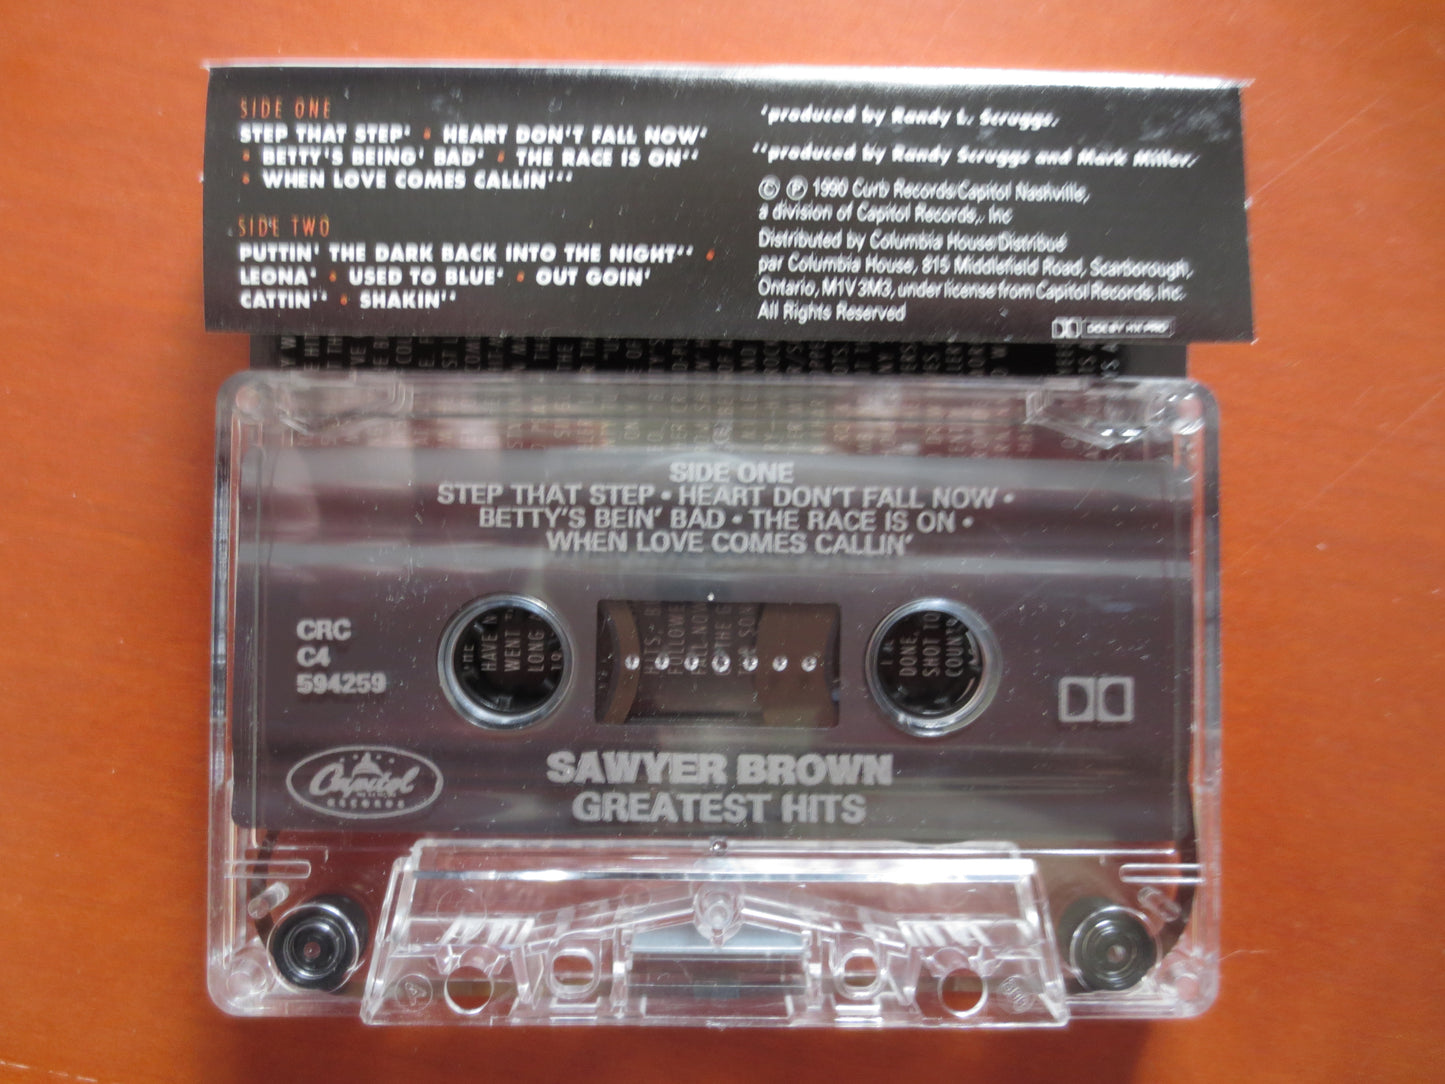 SAWYER BROWN, Country Tape, GREATEST Hits, Sawyer Brown Lp, Tape Cassette, Country Cassette, Pop Cassette, 1990 Cassette